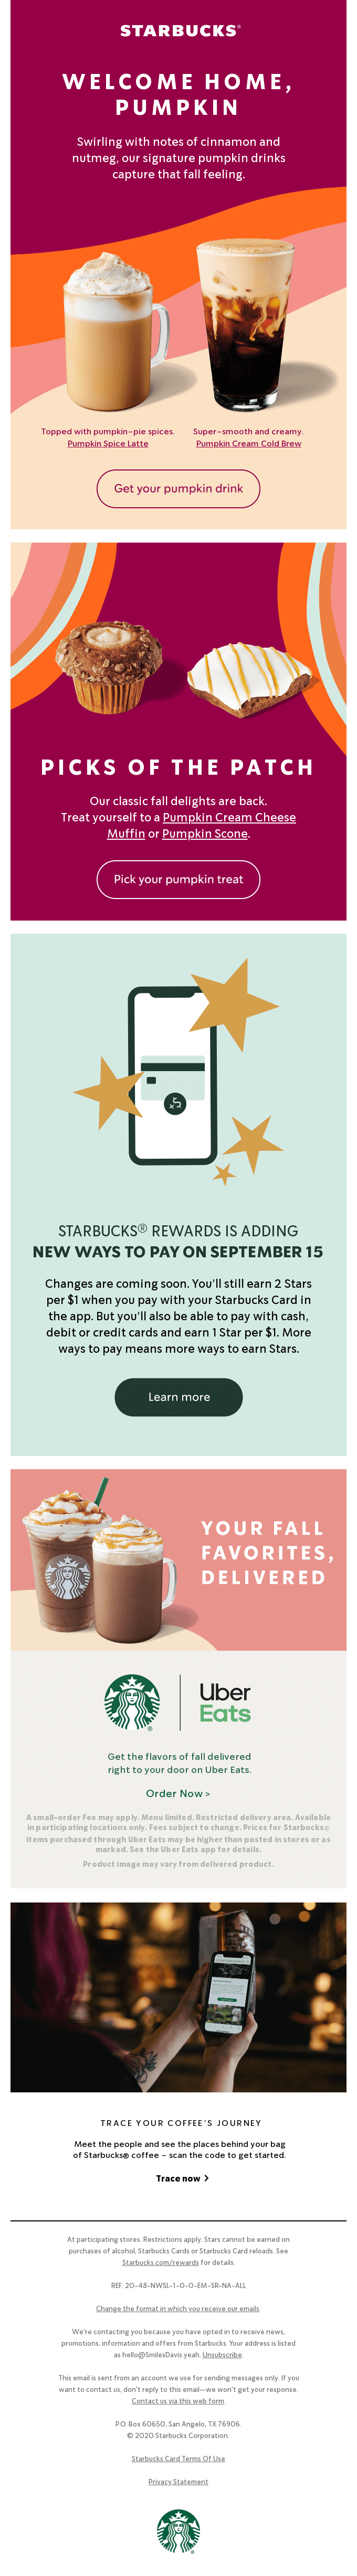 We're in a pumpkin state of mind - Starbucks Email Newsletter